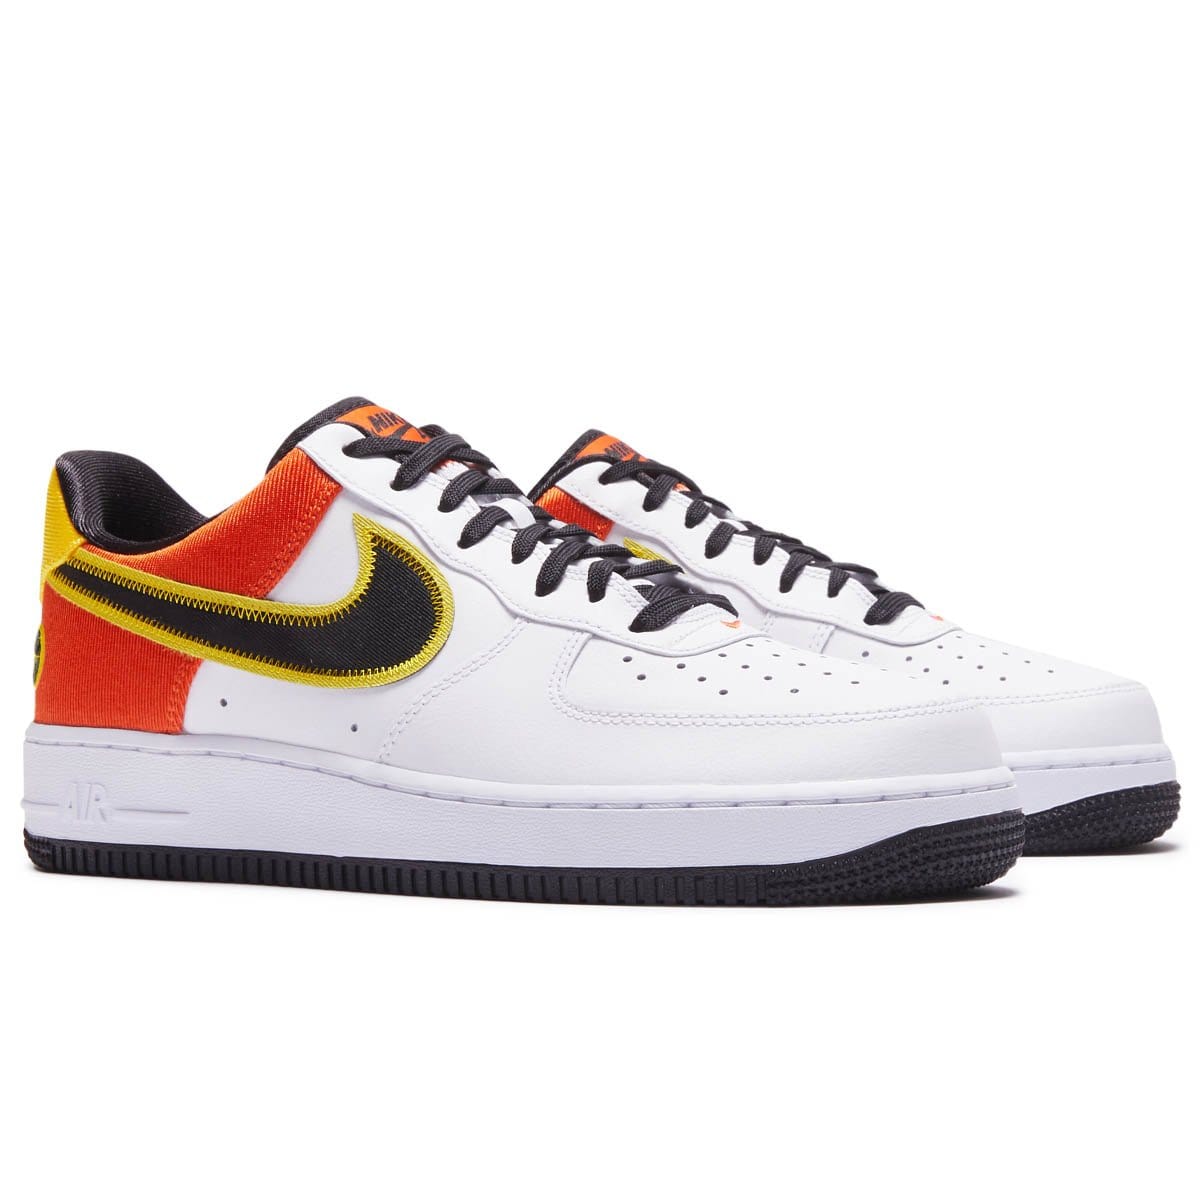 Nike Shoes AIR FORCE 1 '07 LV8